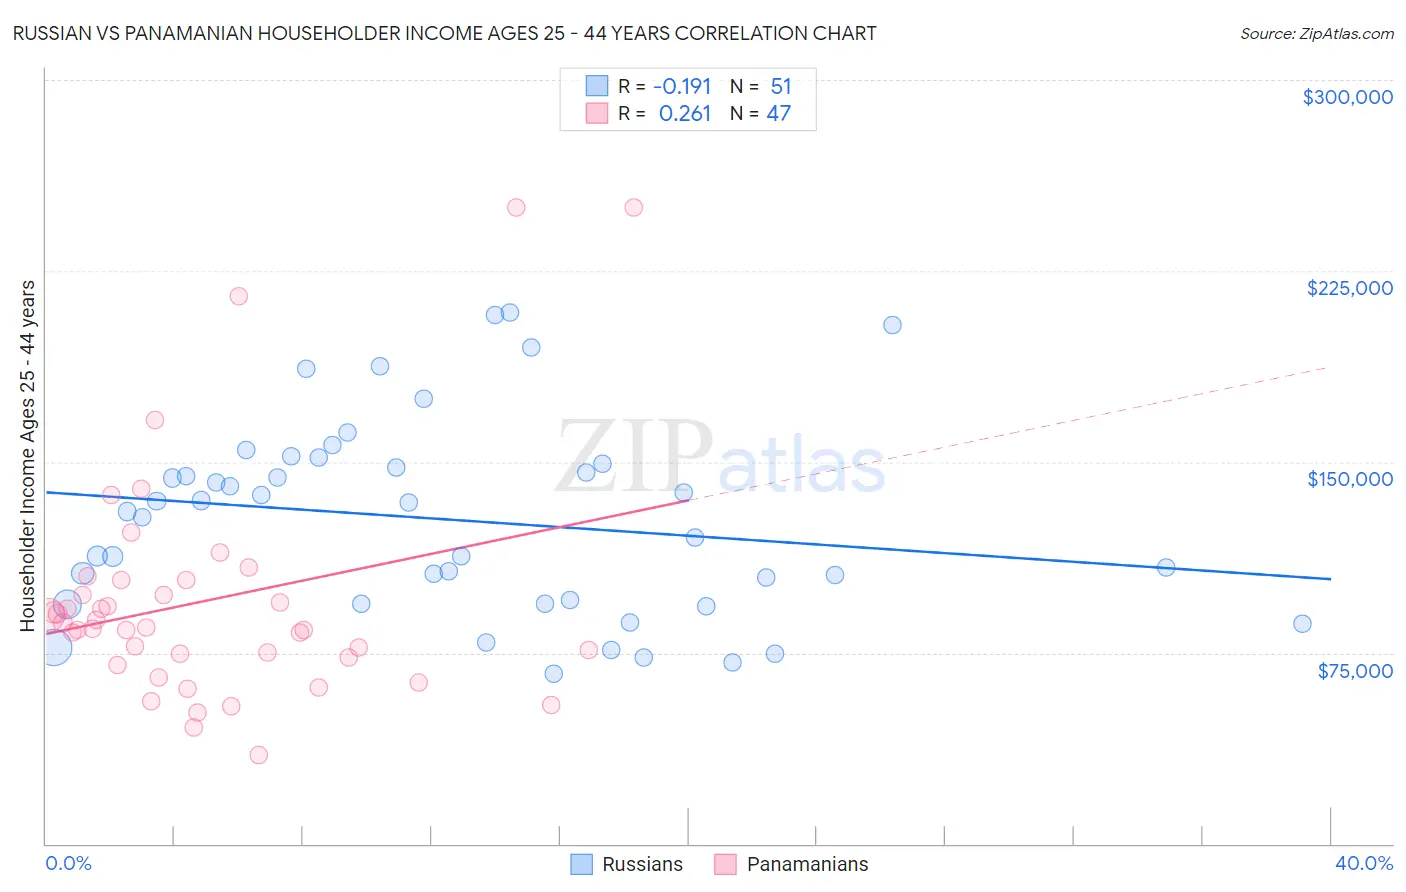 Russian vs Panamanian Householder Income Ages 25 - 44 years